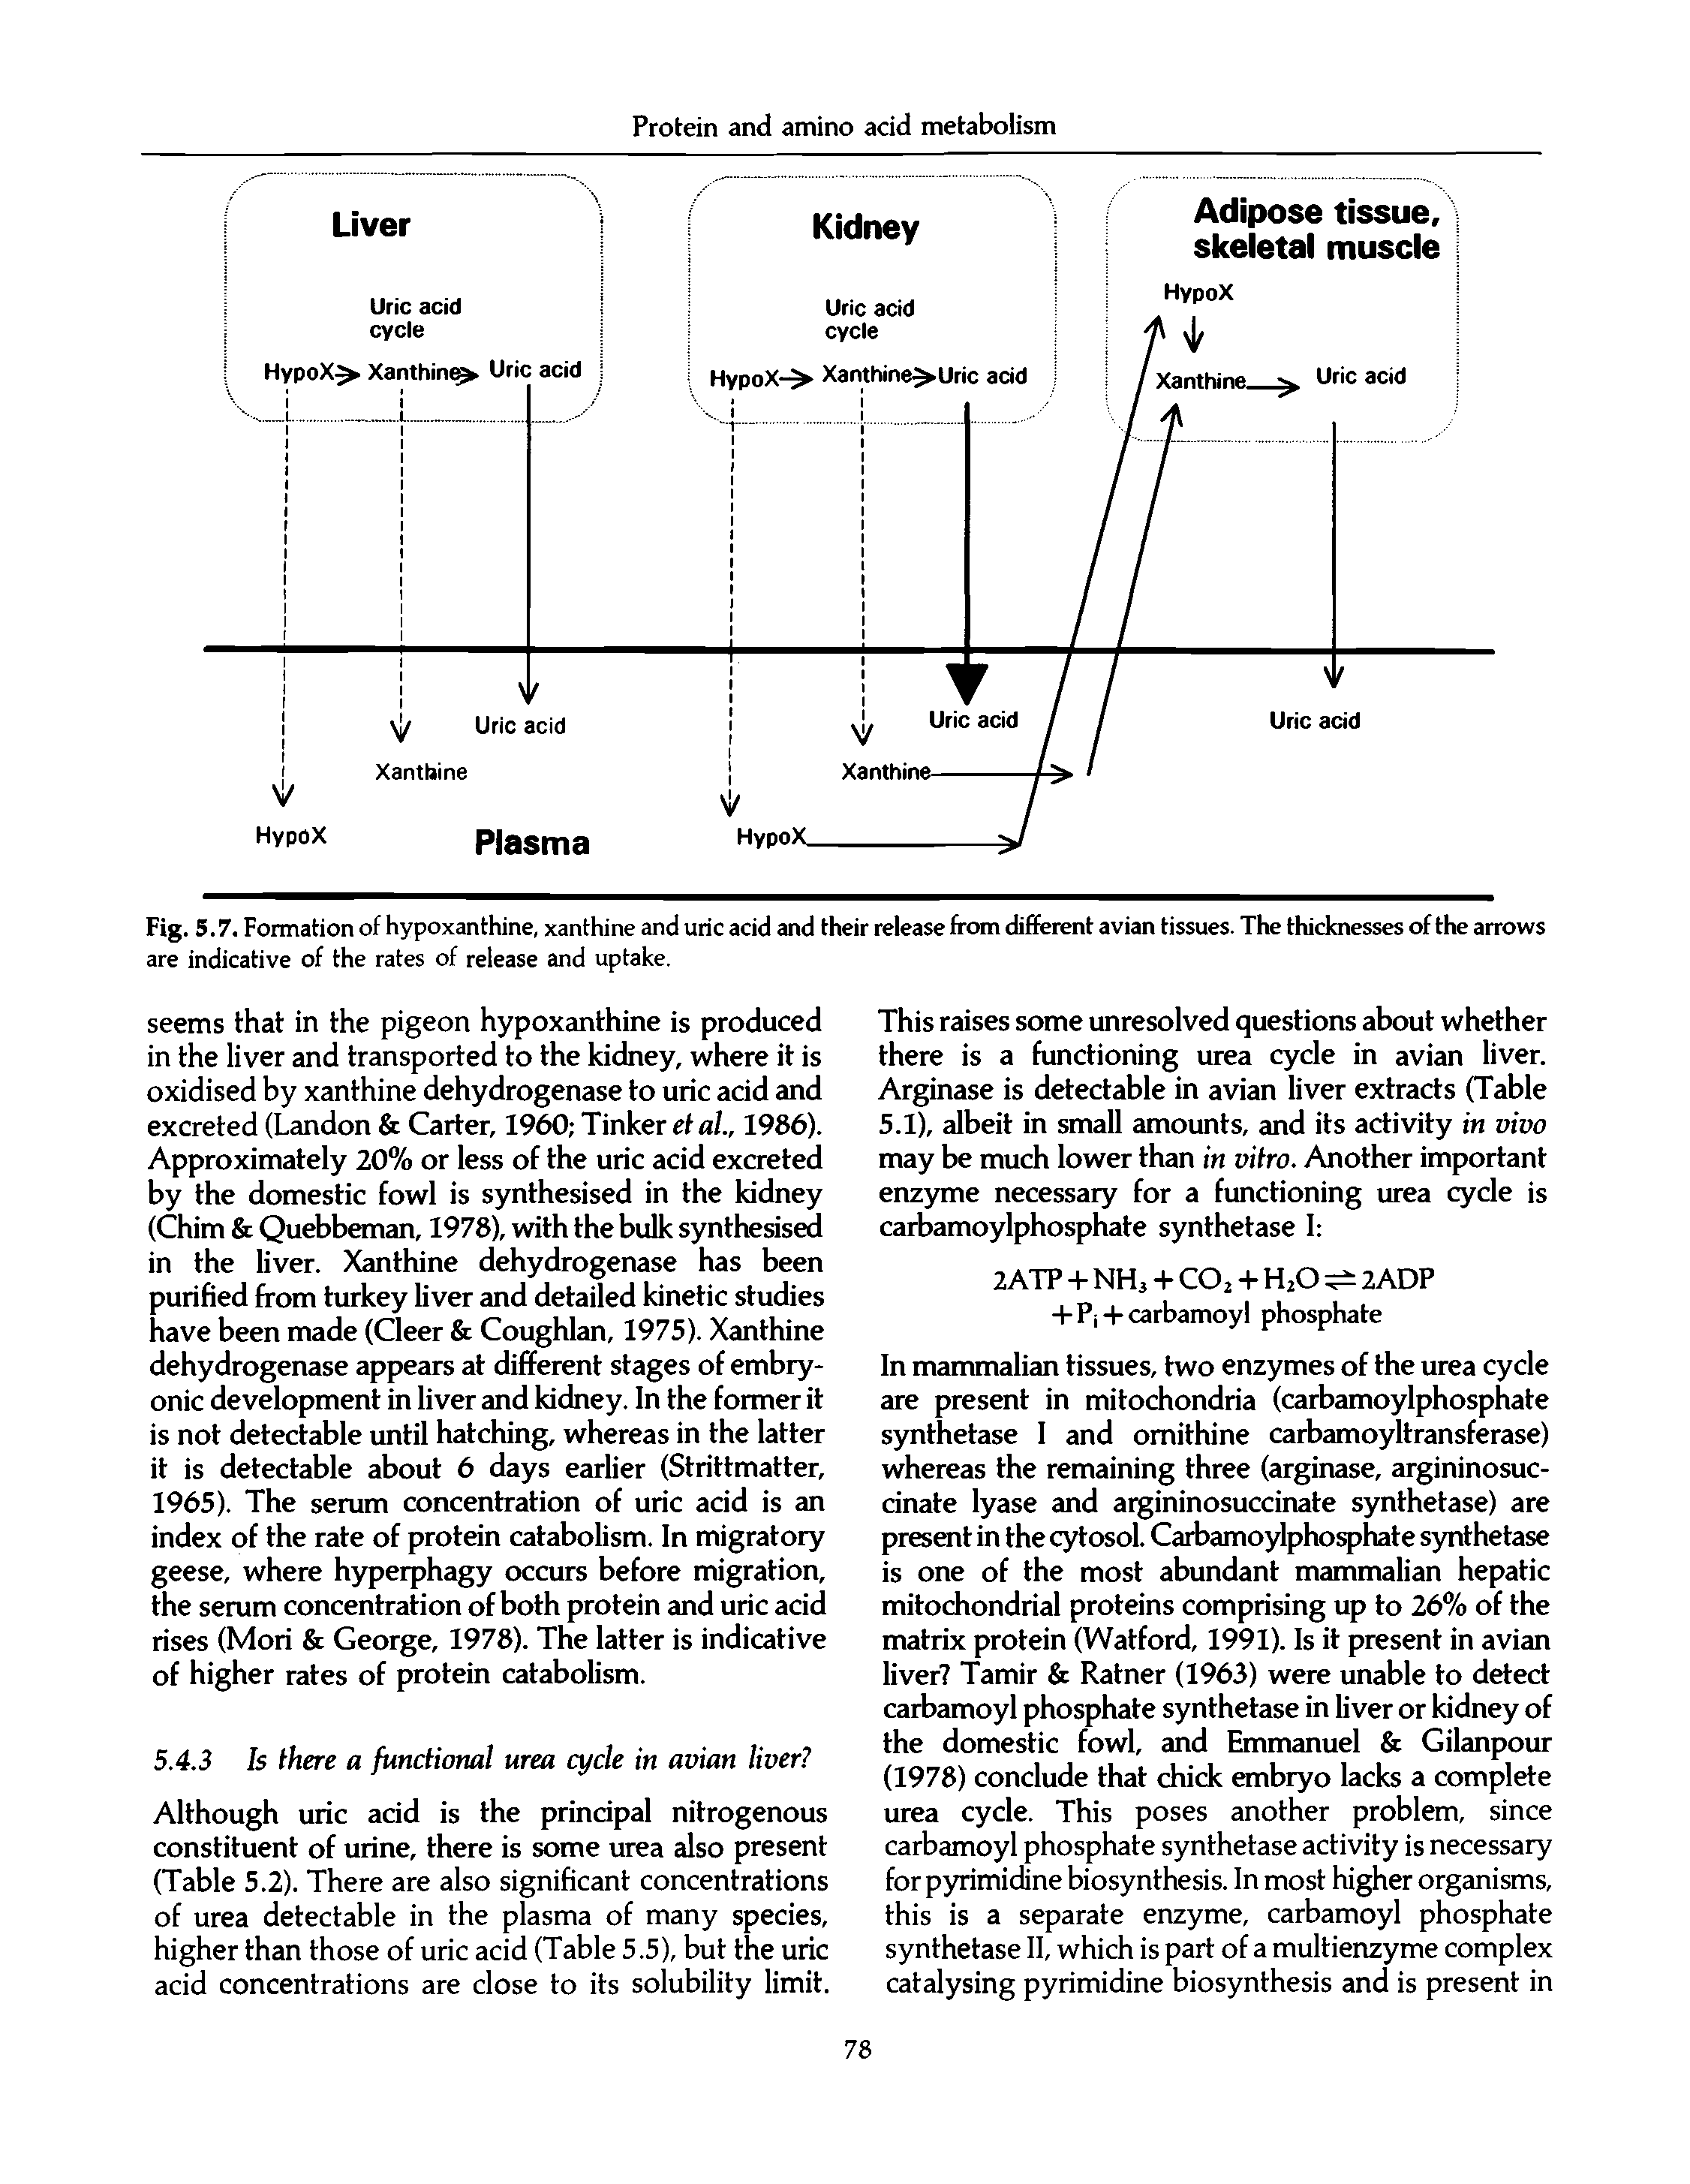 Fig. 5.7. Formation of hypoxanthine, xanthine and uric acid and their release from different avian tissues. The thicknesses of the arrows are indicative of the rates of release and uptake.